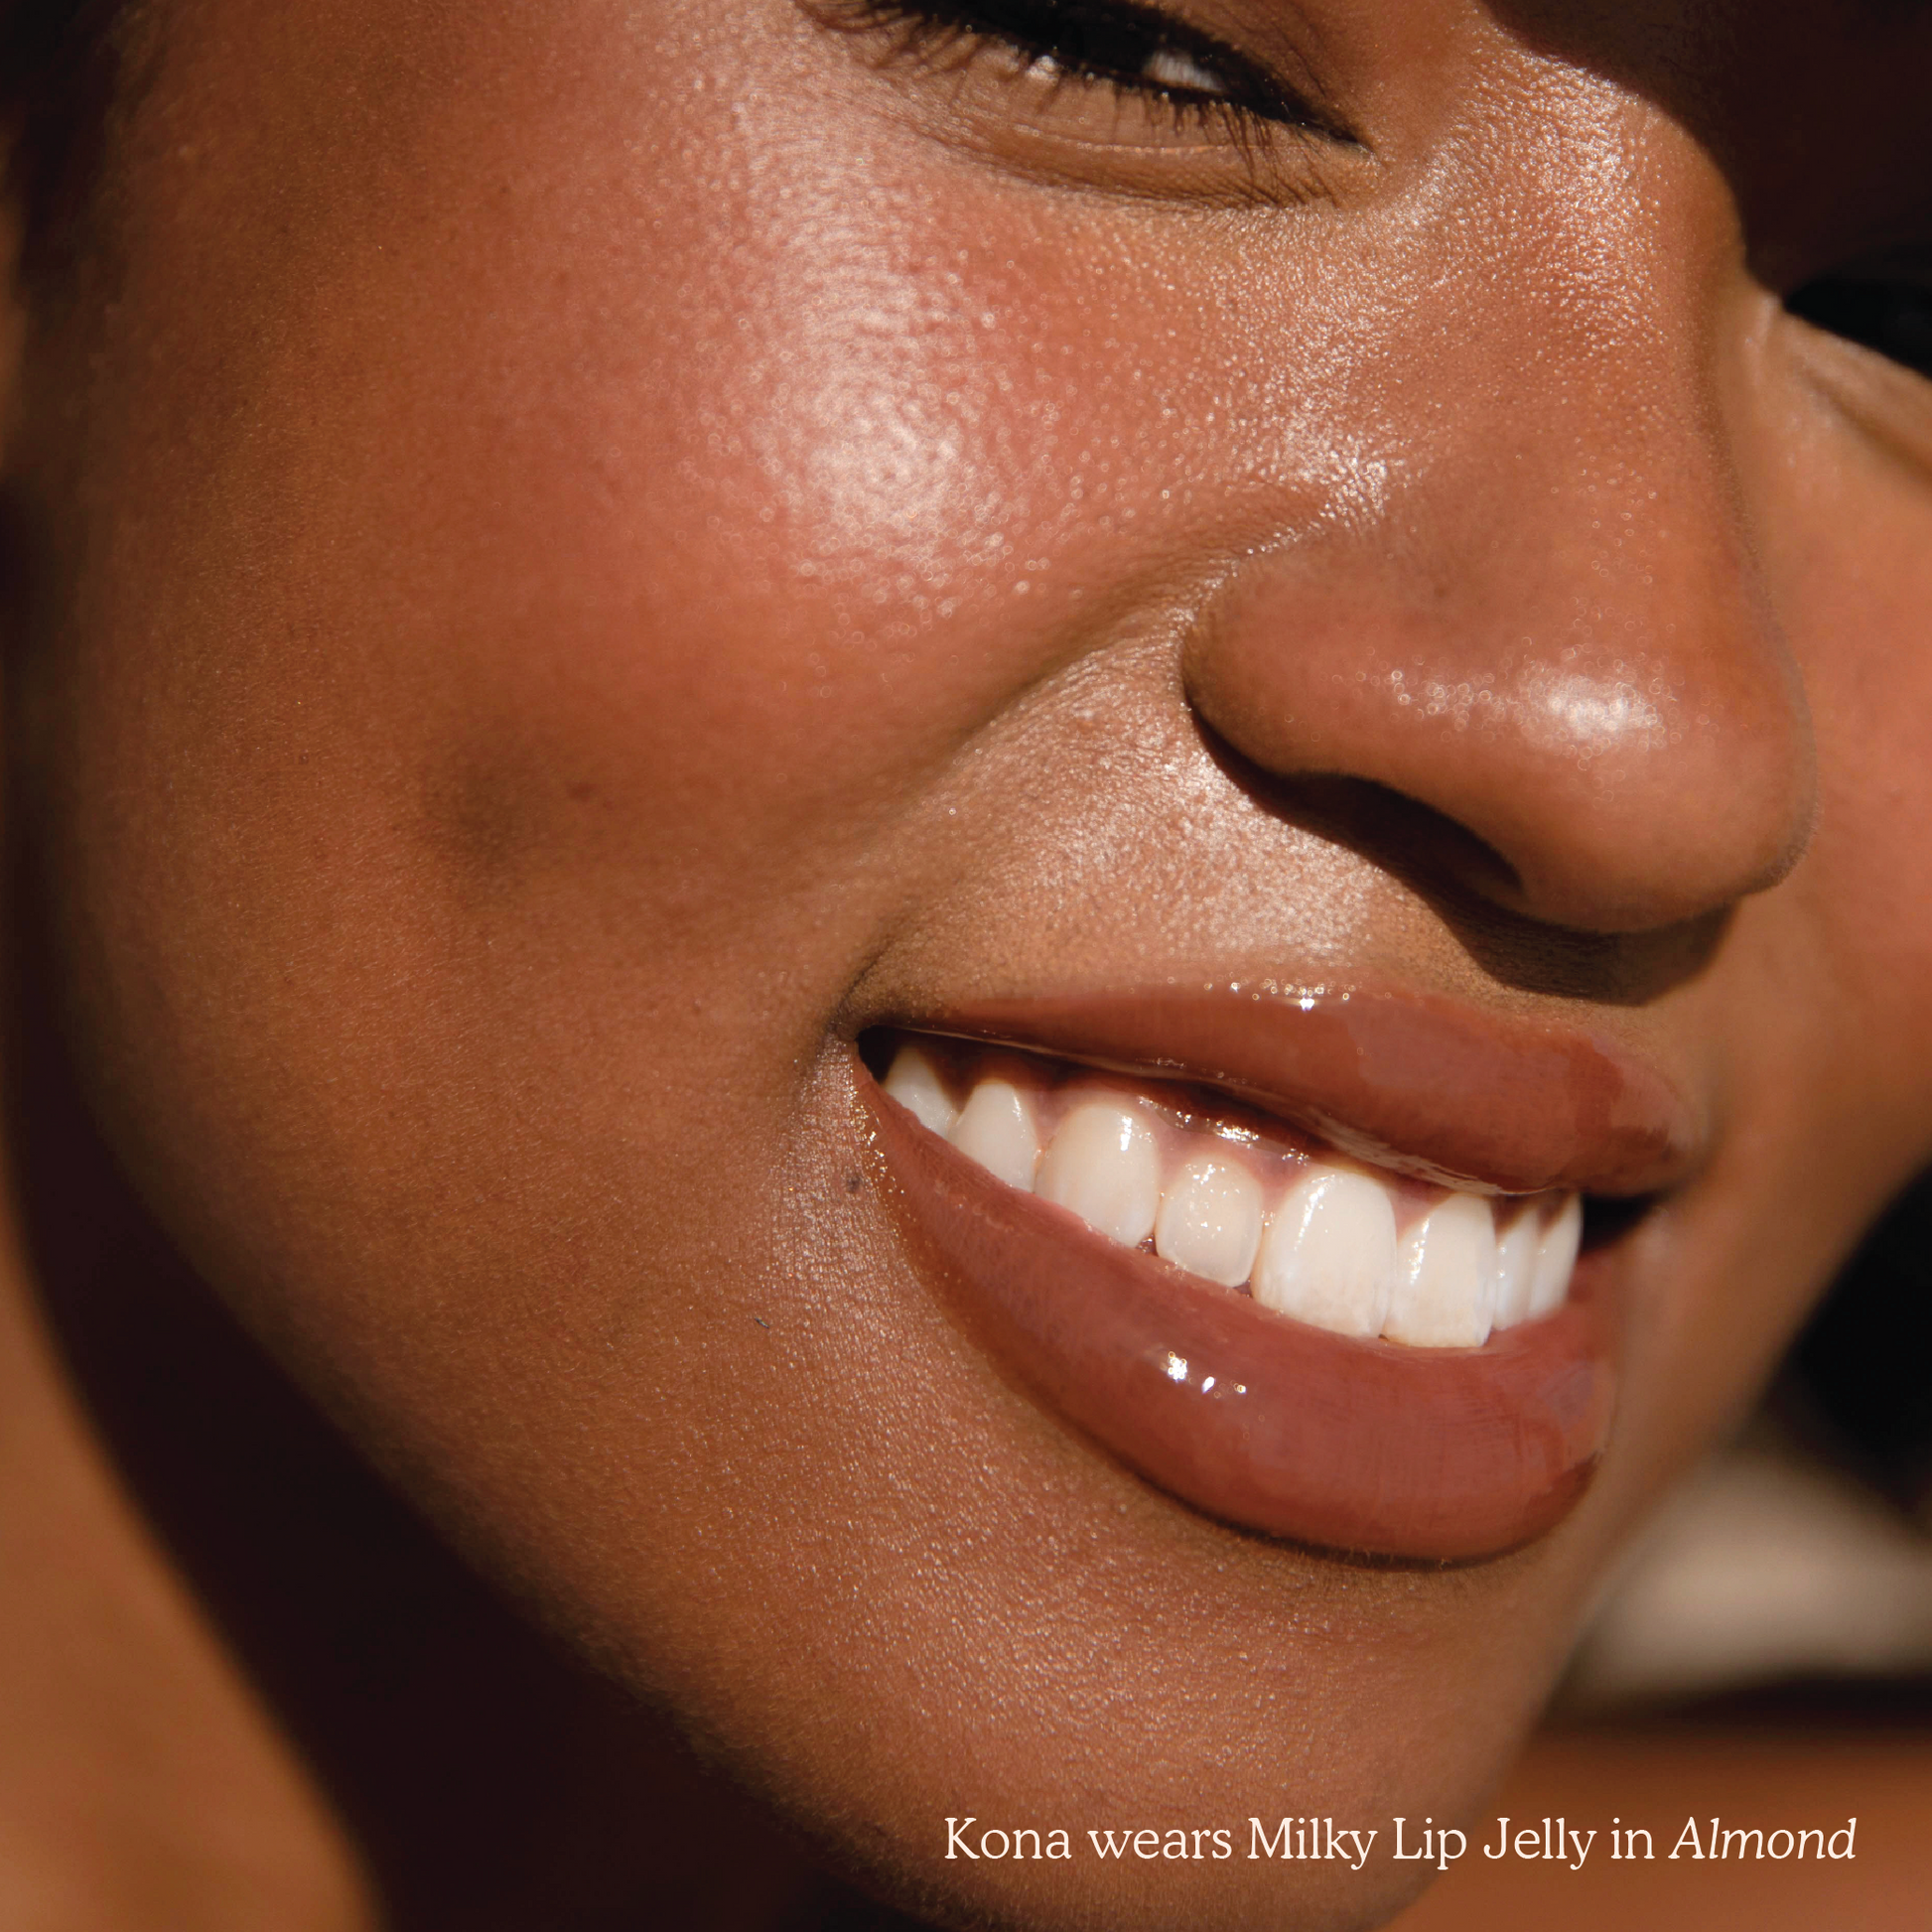 [Shared - Closeup photo of a girl with very glossy lips, wearing the Tower 28 Beauty ShineOn Milky Lip Jelly shade in Almond (a milky chocolate-brown)